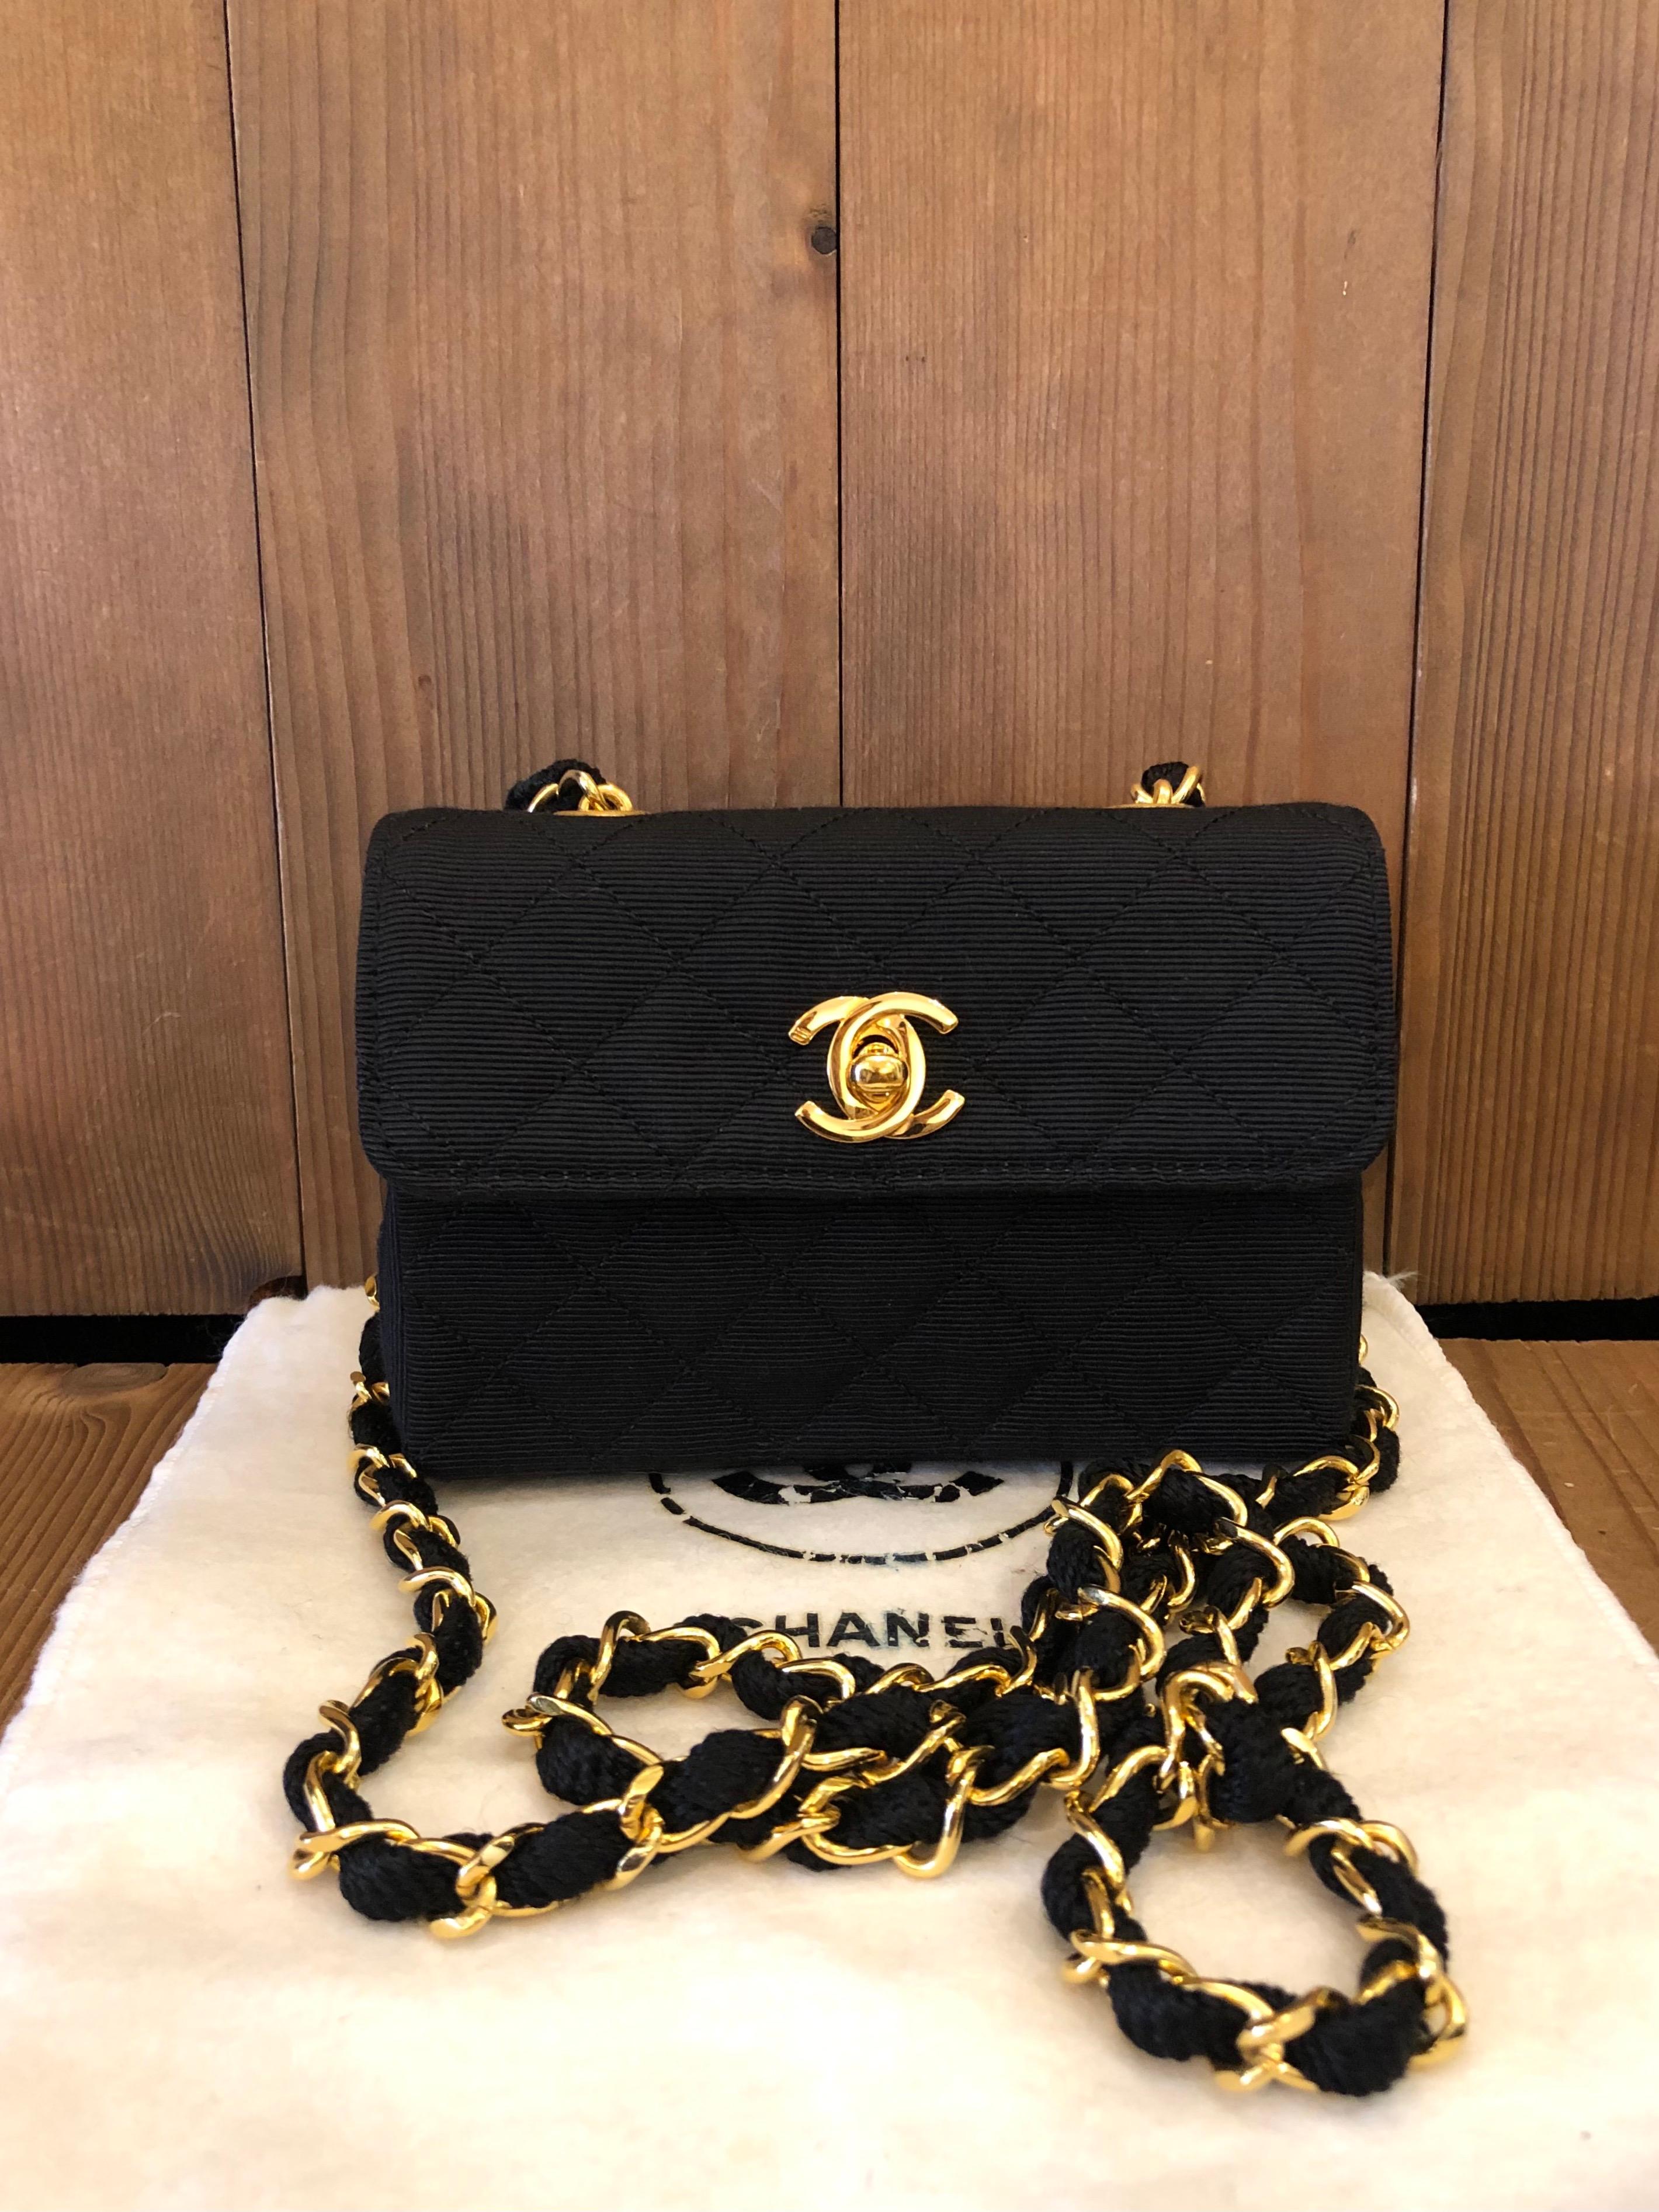 1990s Chanel mini flap bag in black canvas and gold hardware featuring a gold toned crossbody chain interlaced with the same fabric. Made in France. Rectangular body measures 5.5 x 3.75 x 1.75 inches Chain drop 19 inches. Comes with dust bag.